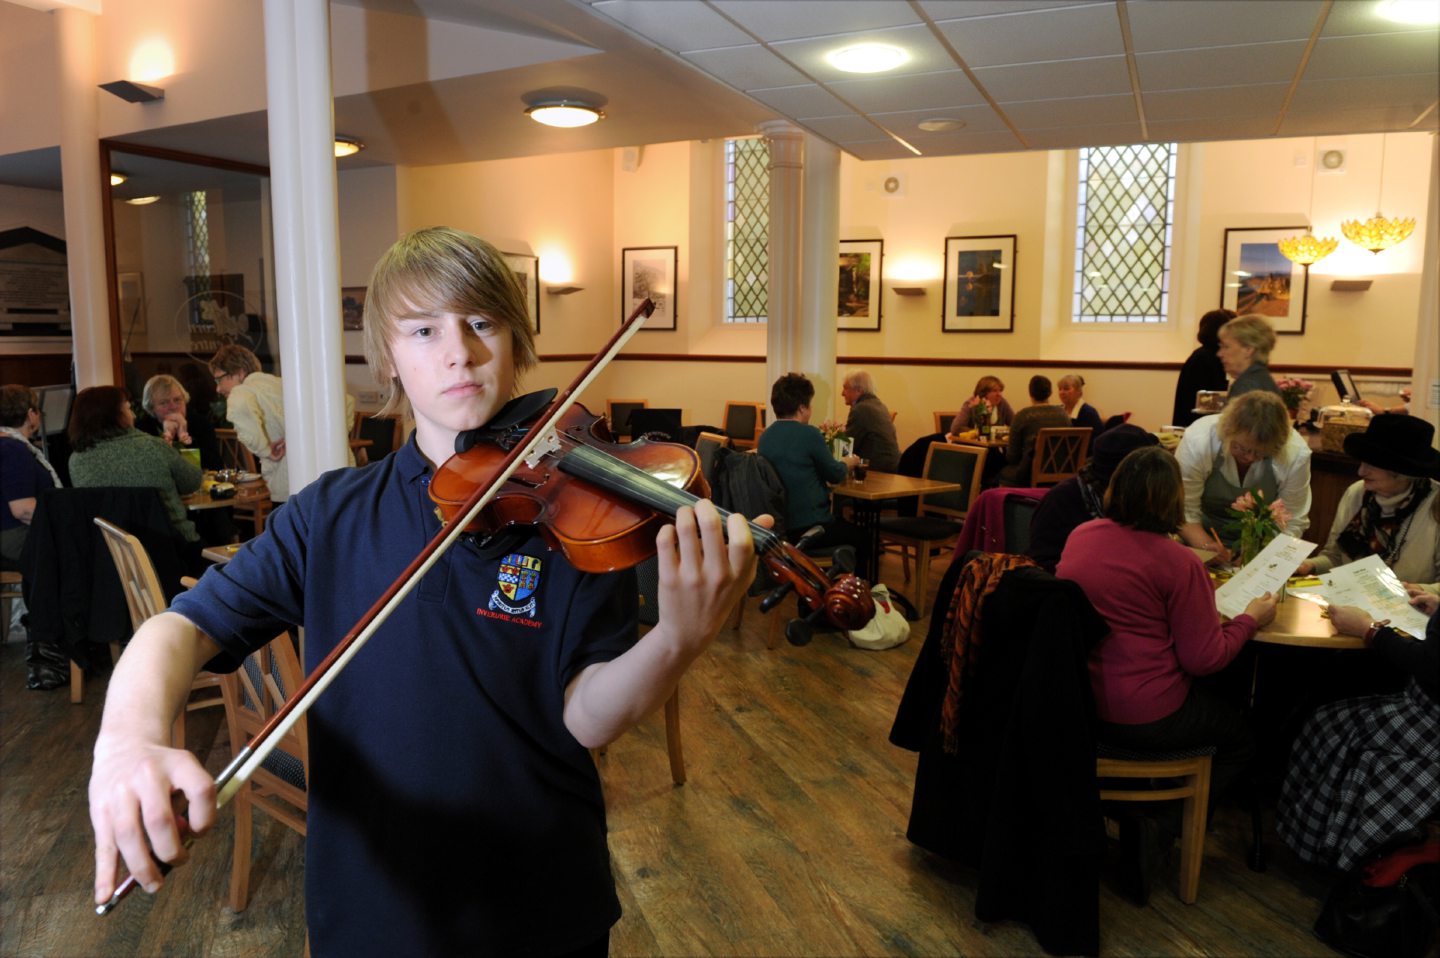 An Inverurie Academy pupil posing for photos while playing violin